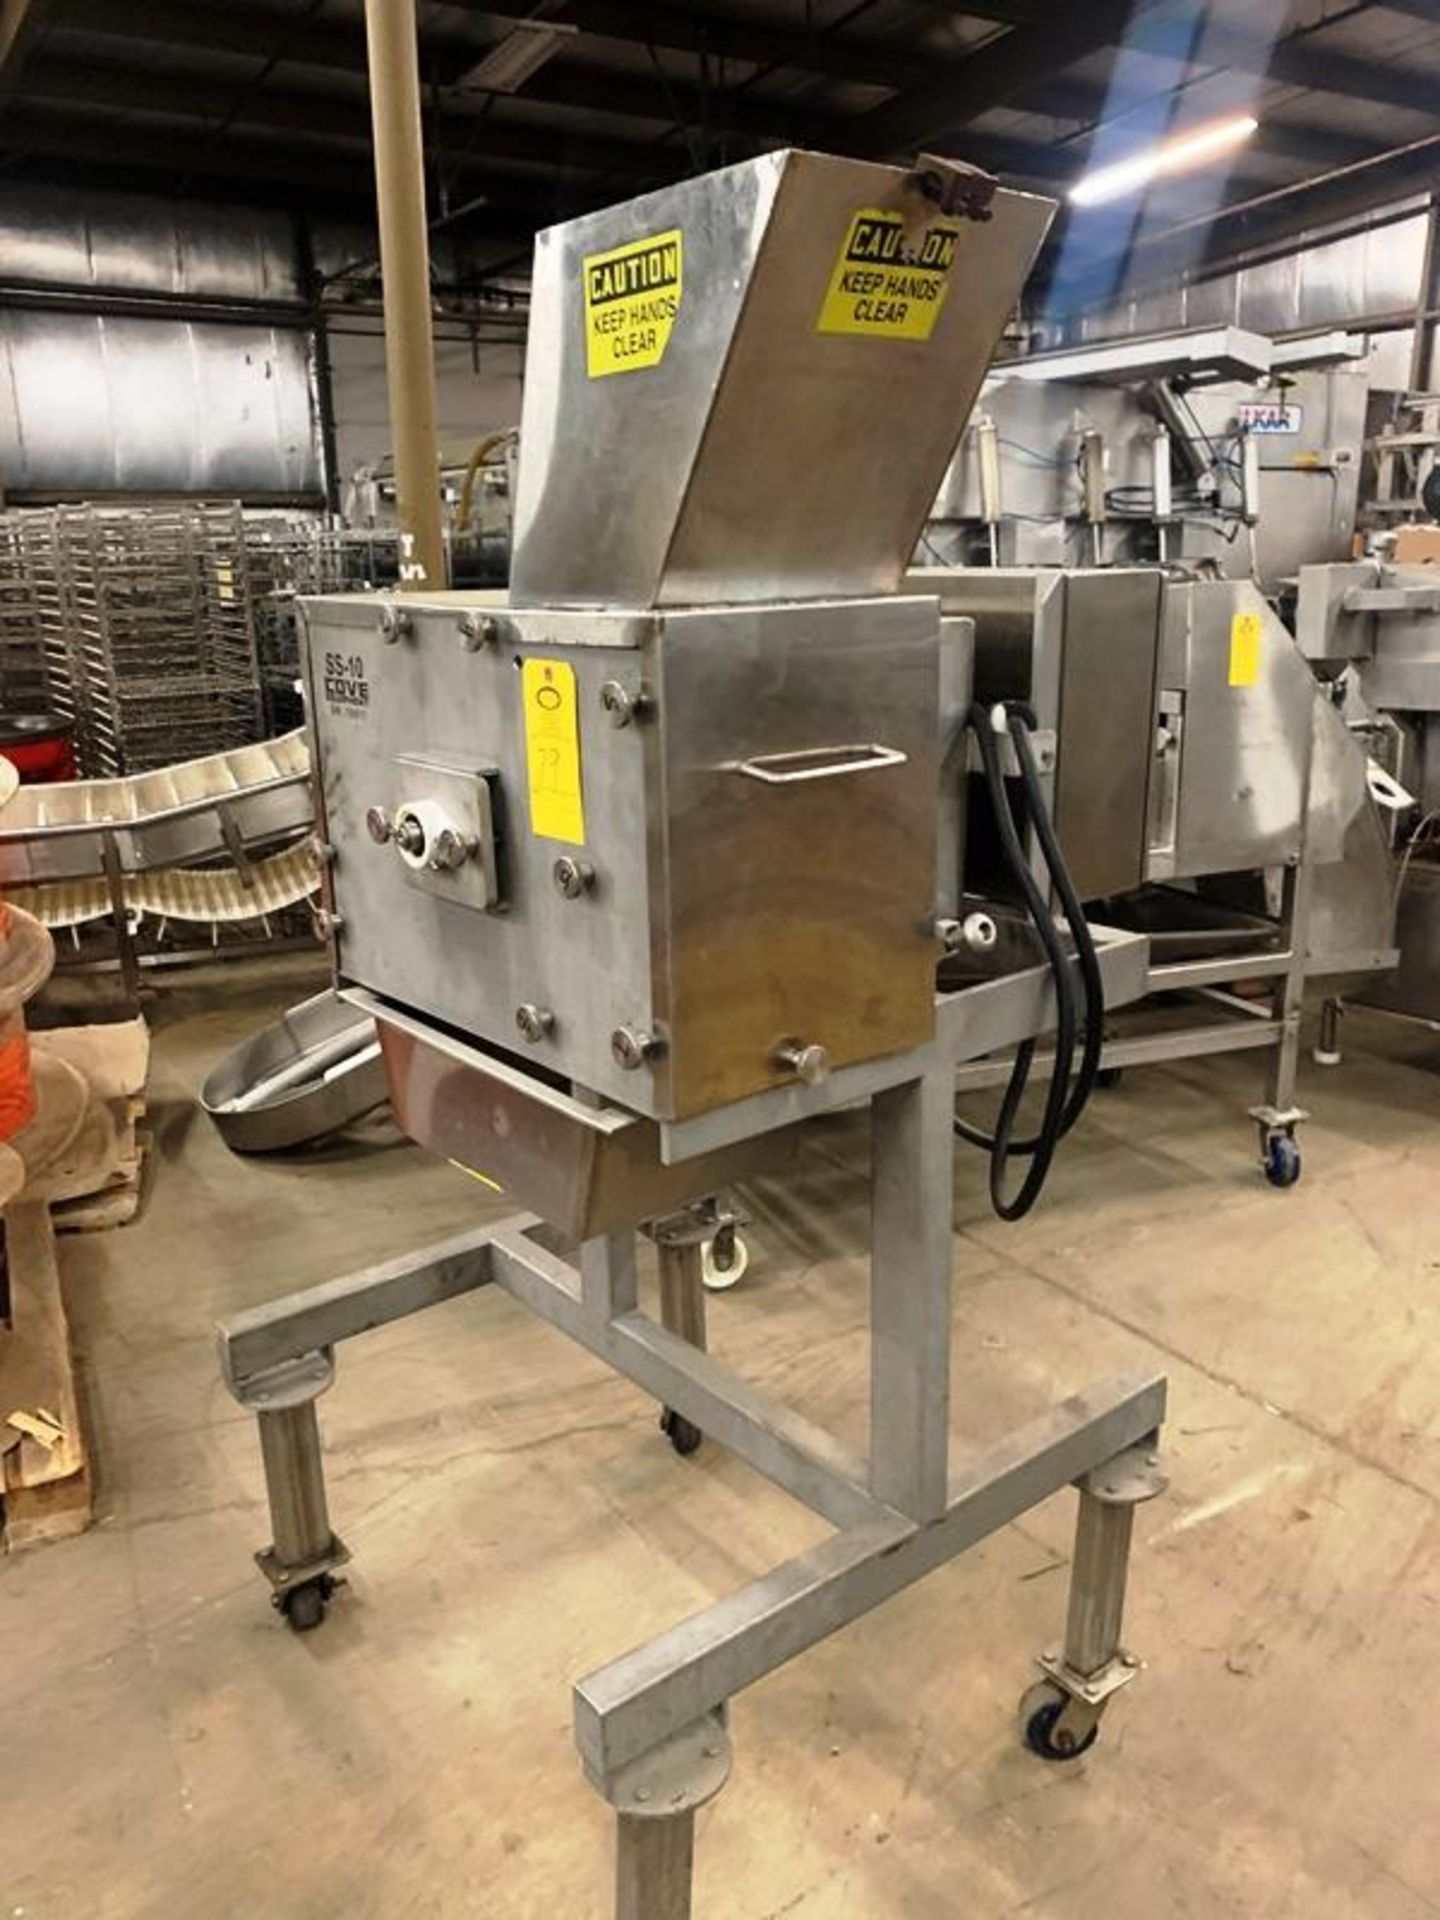 Cove Equipment Mdl. SS10 Jerky Slicer (Located in Sandwich, IL) - Image 2 of 7